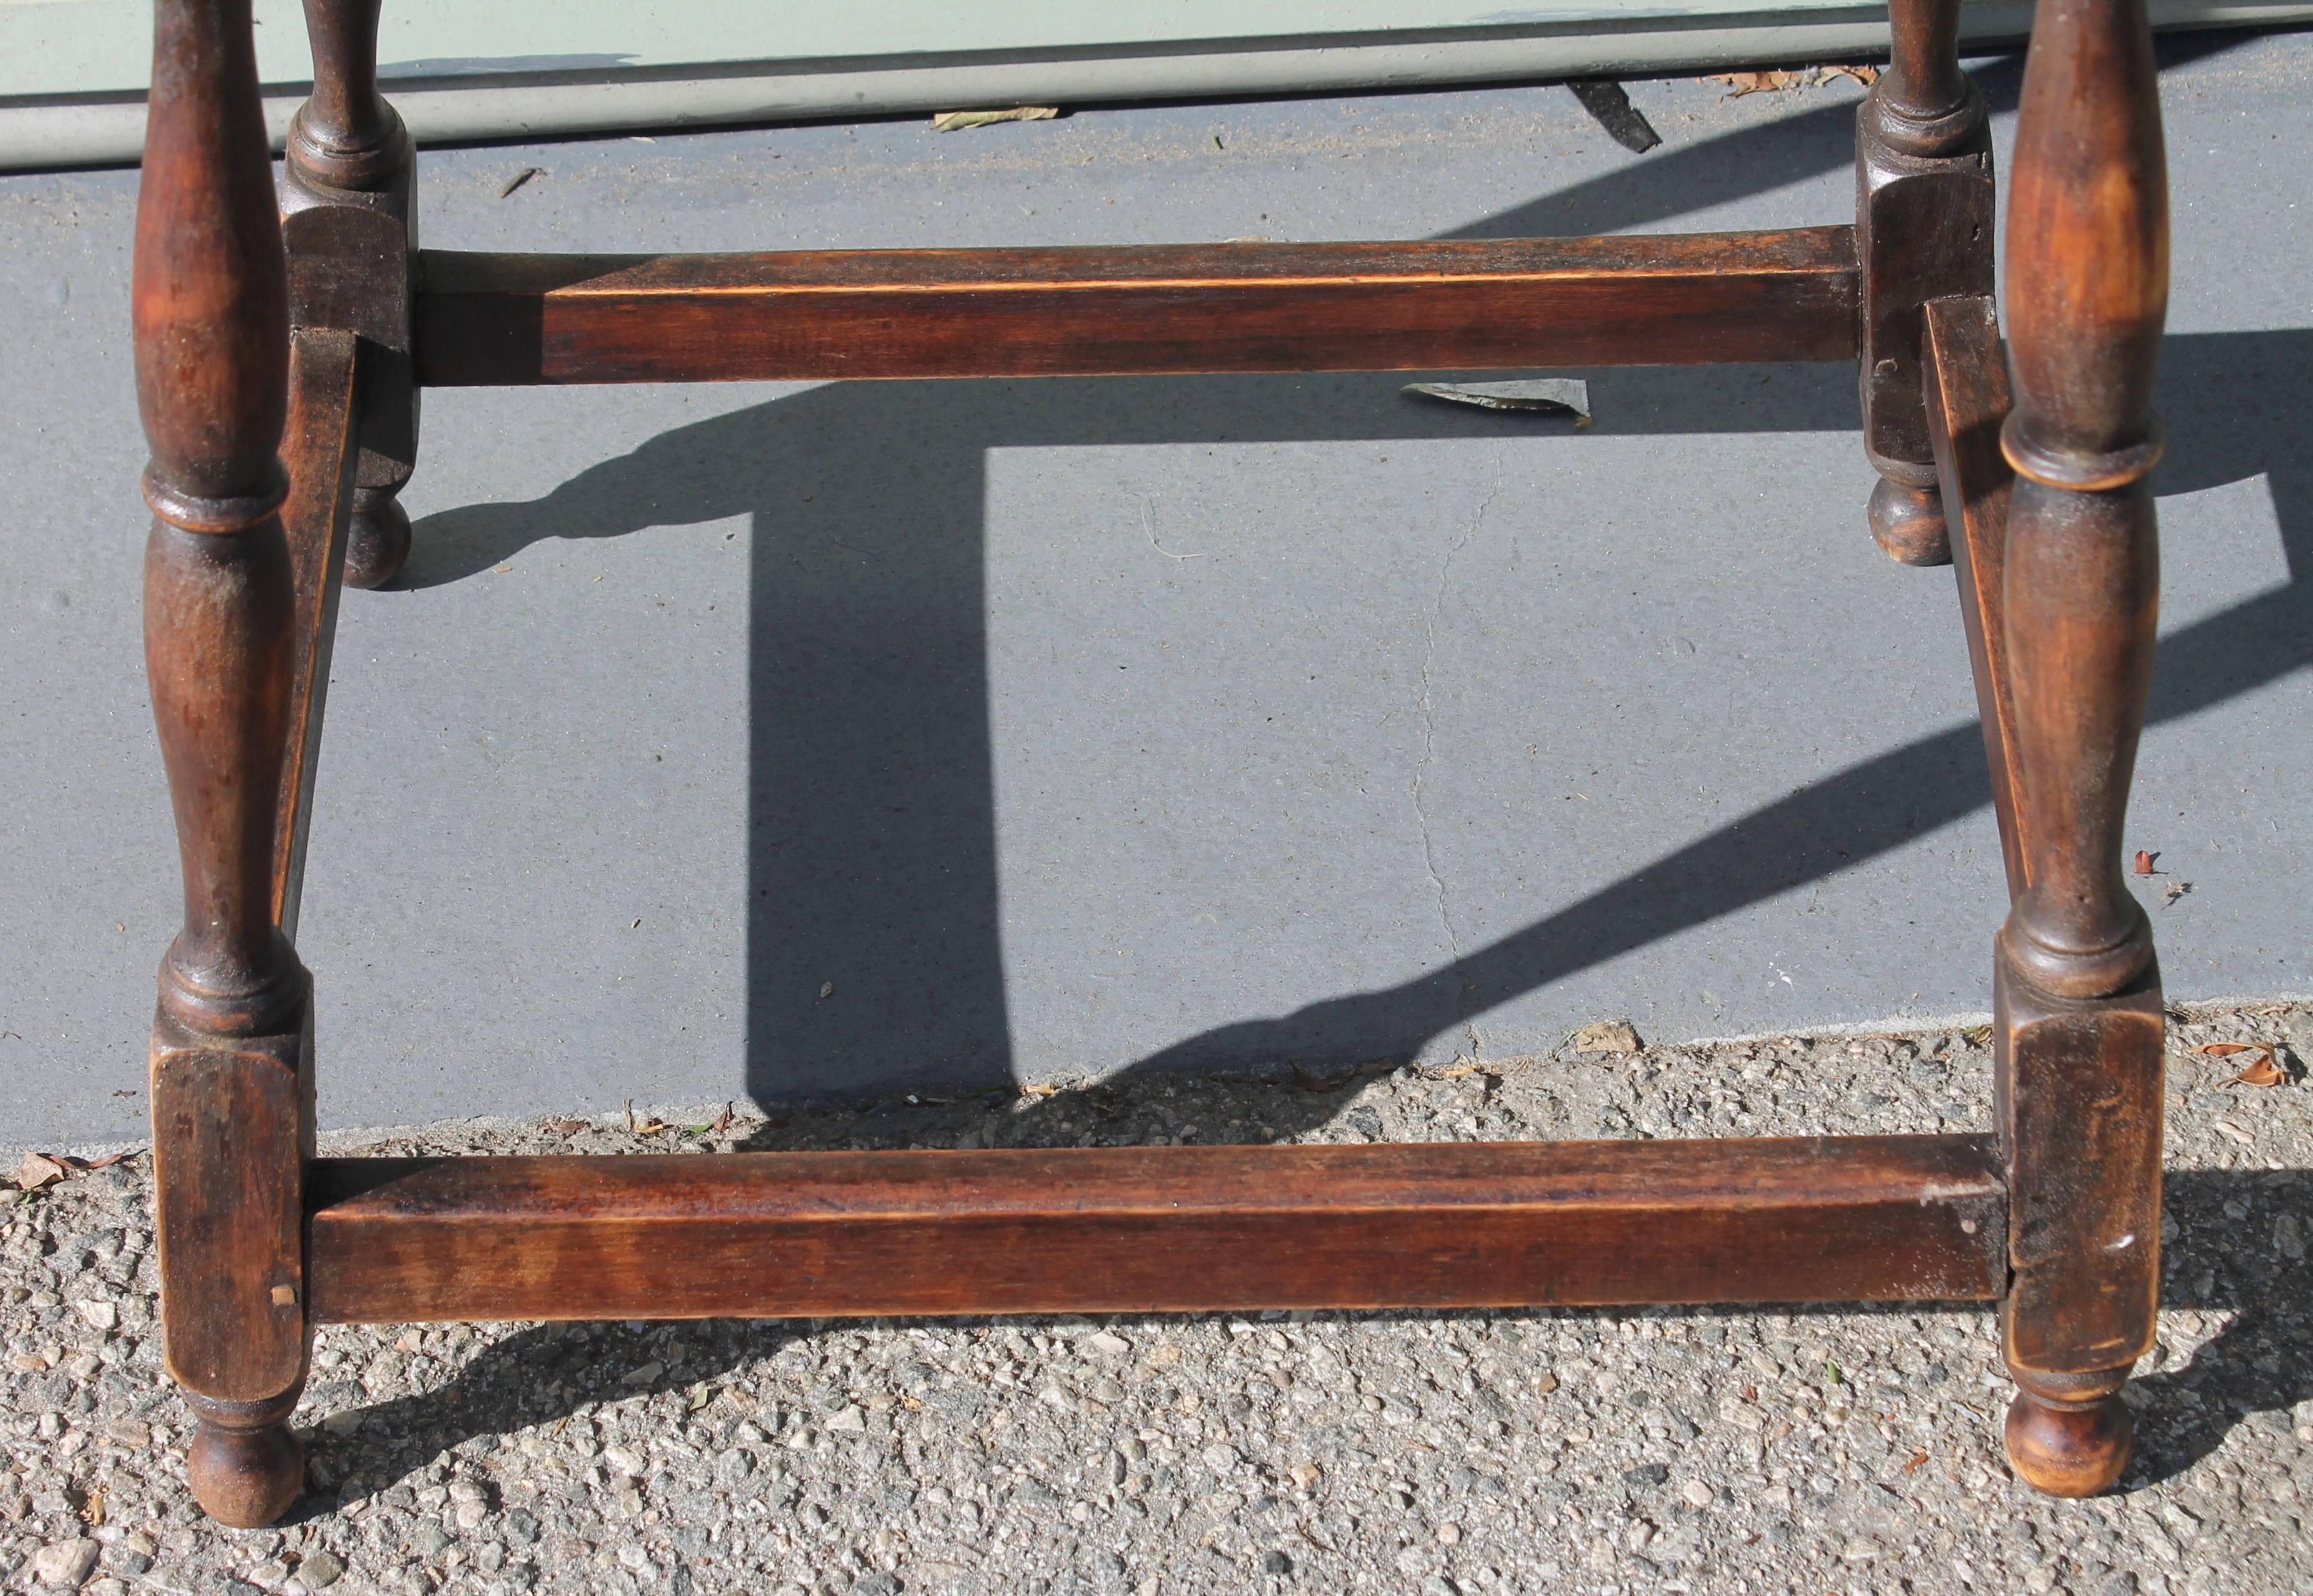 Patinated Early 19th Century New England Tavern Table